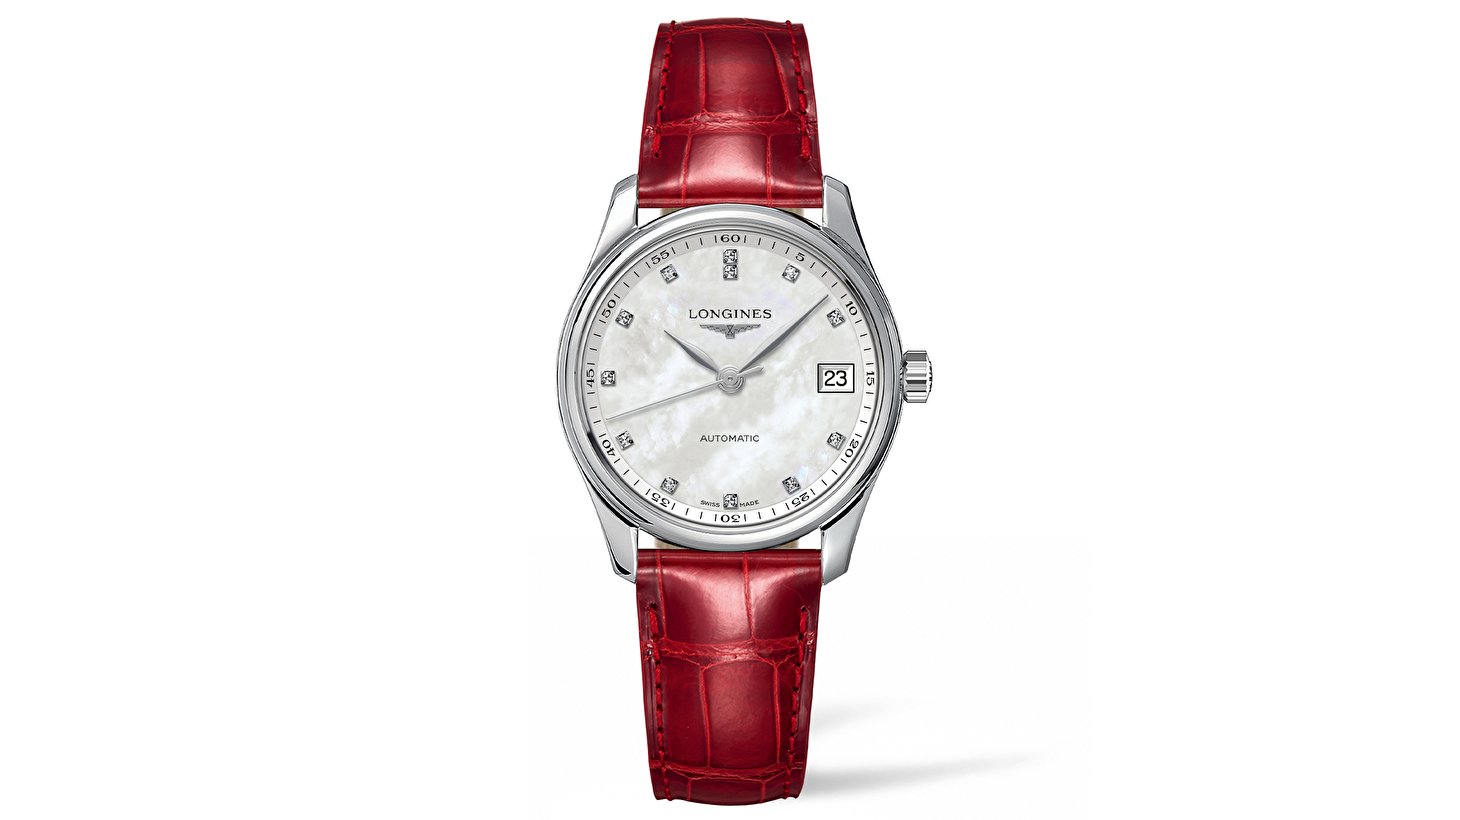 The Longines Master Collection 34 mm